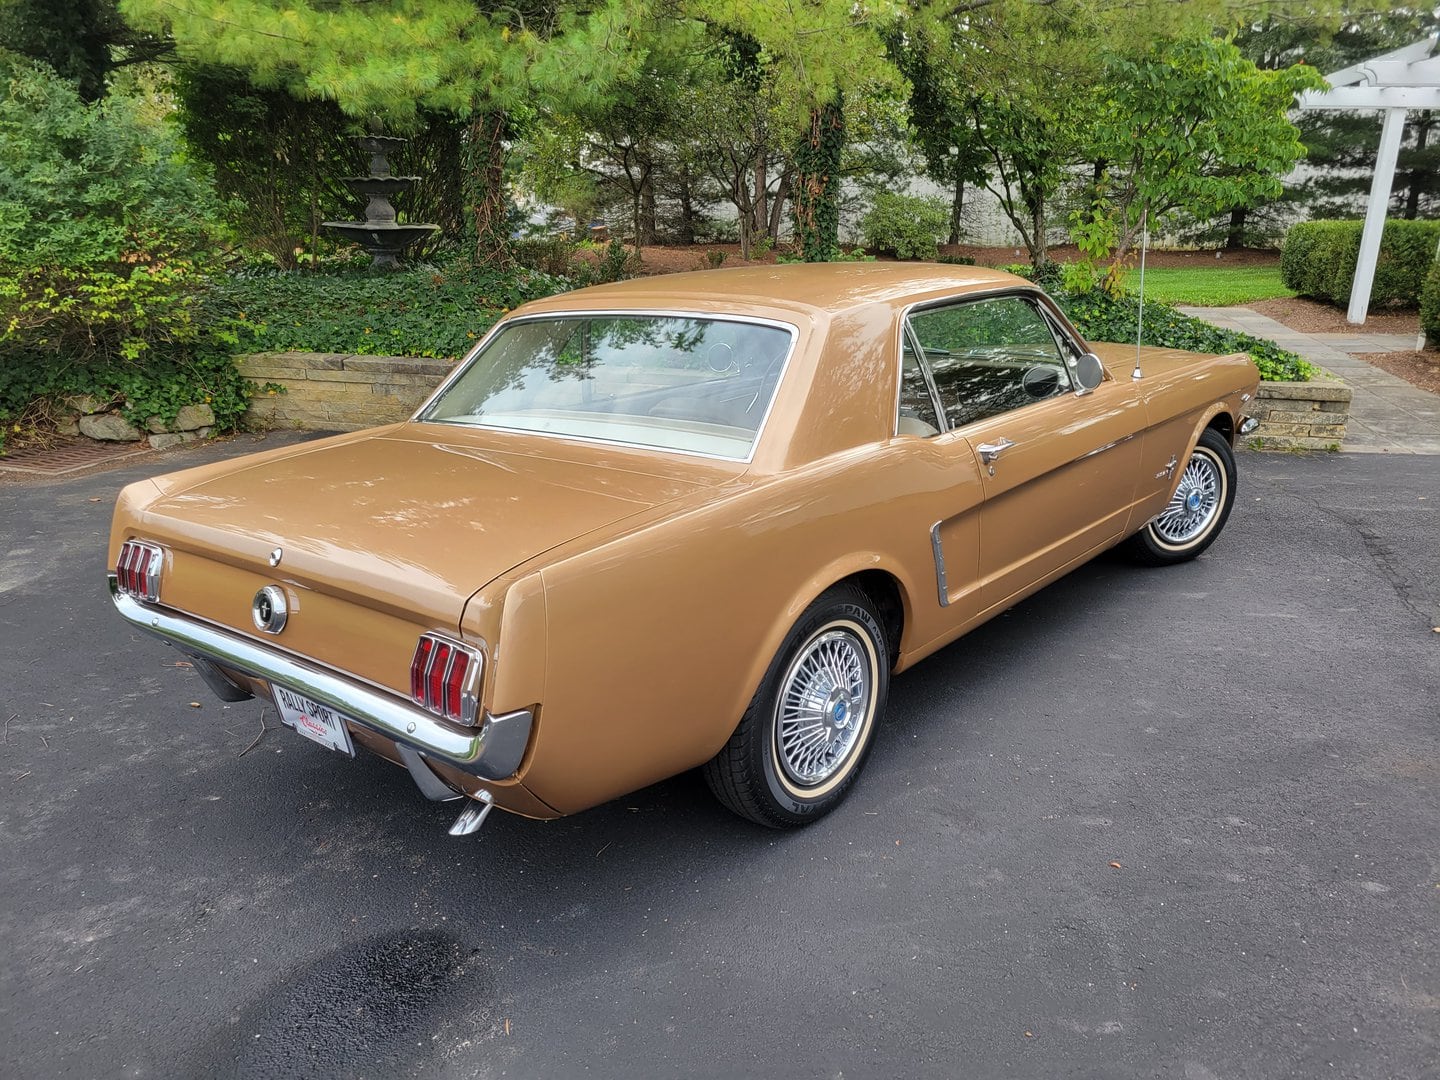 A 1965 Ford Mustang is parked in a parking lot.